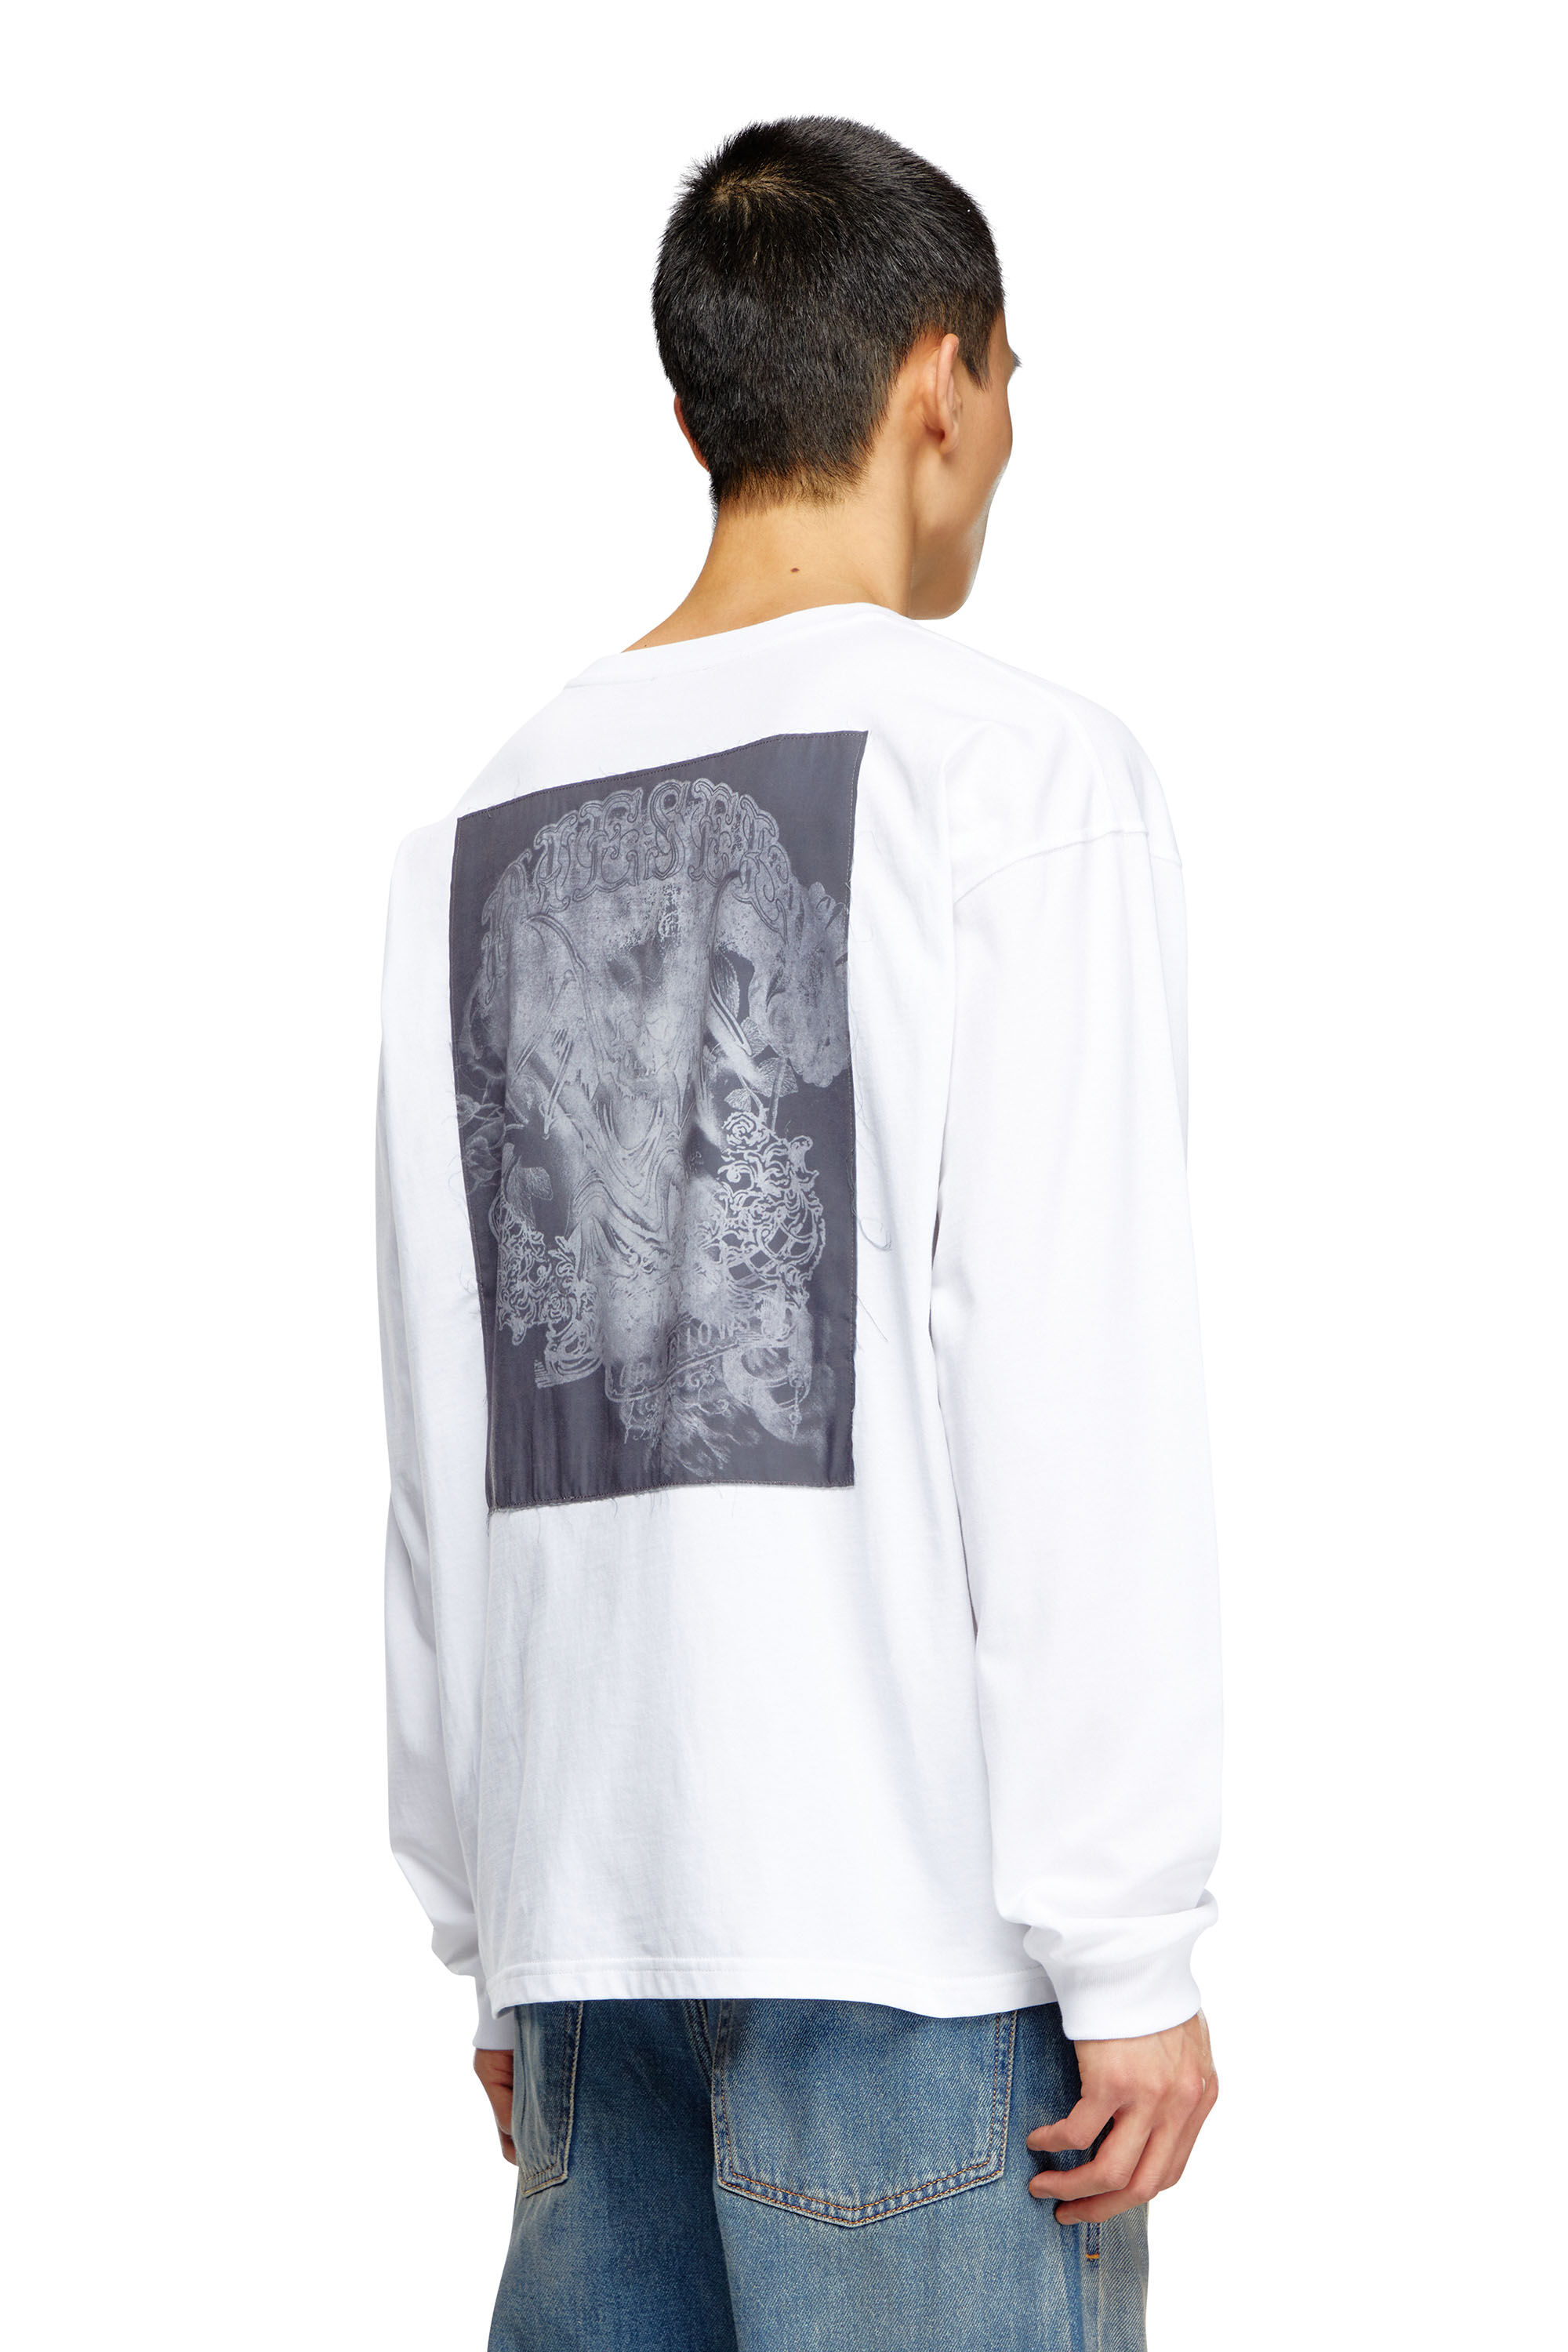 T-BOXT-LS-Q10 Long-sleeve T-shirt with printed patches｜ホワイト 